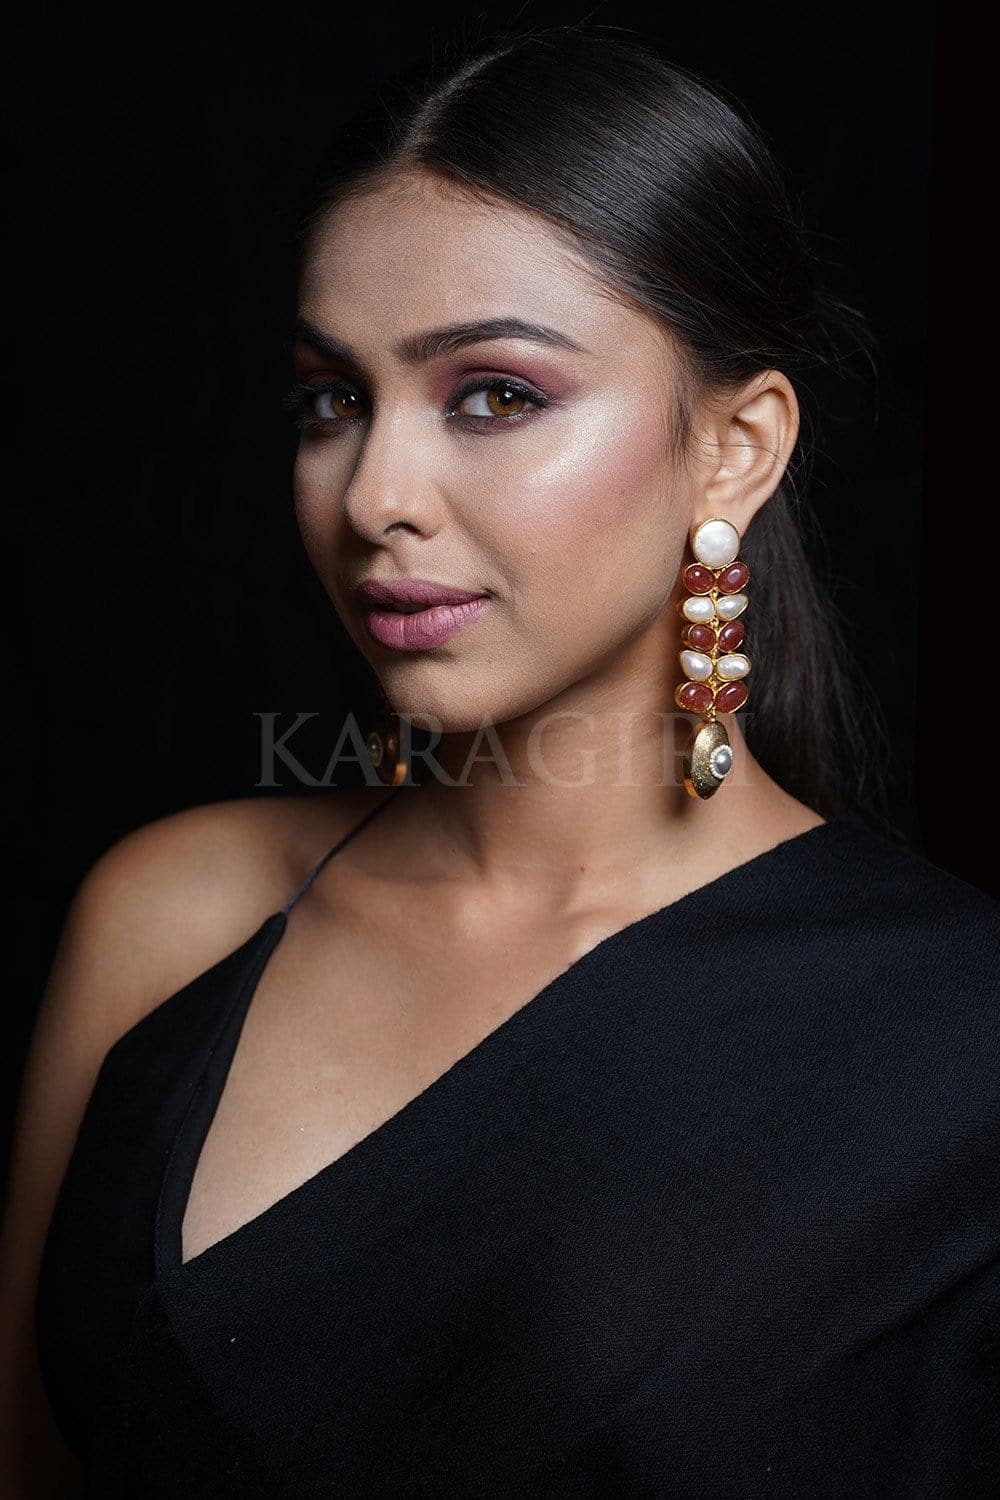 Buy Gold Earrings, Red Lipstick with Black Sarees Scrapbook Look by Kiara